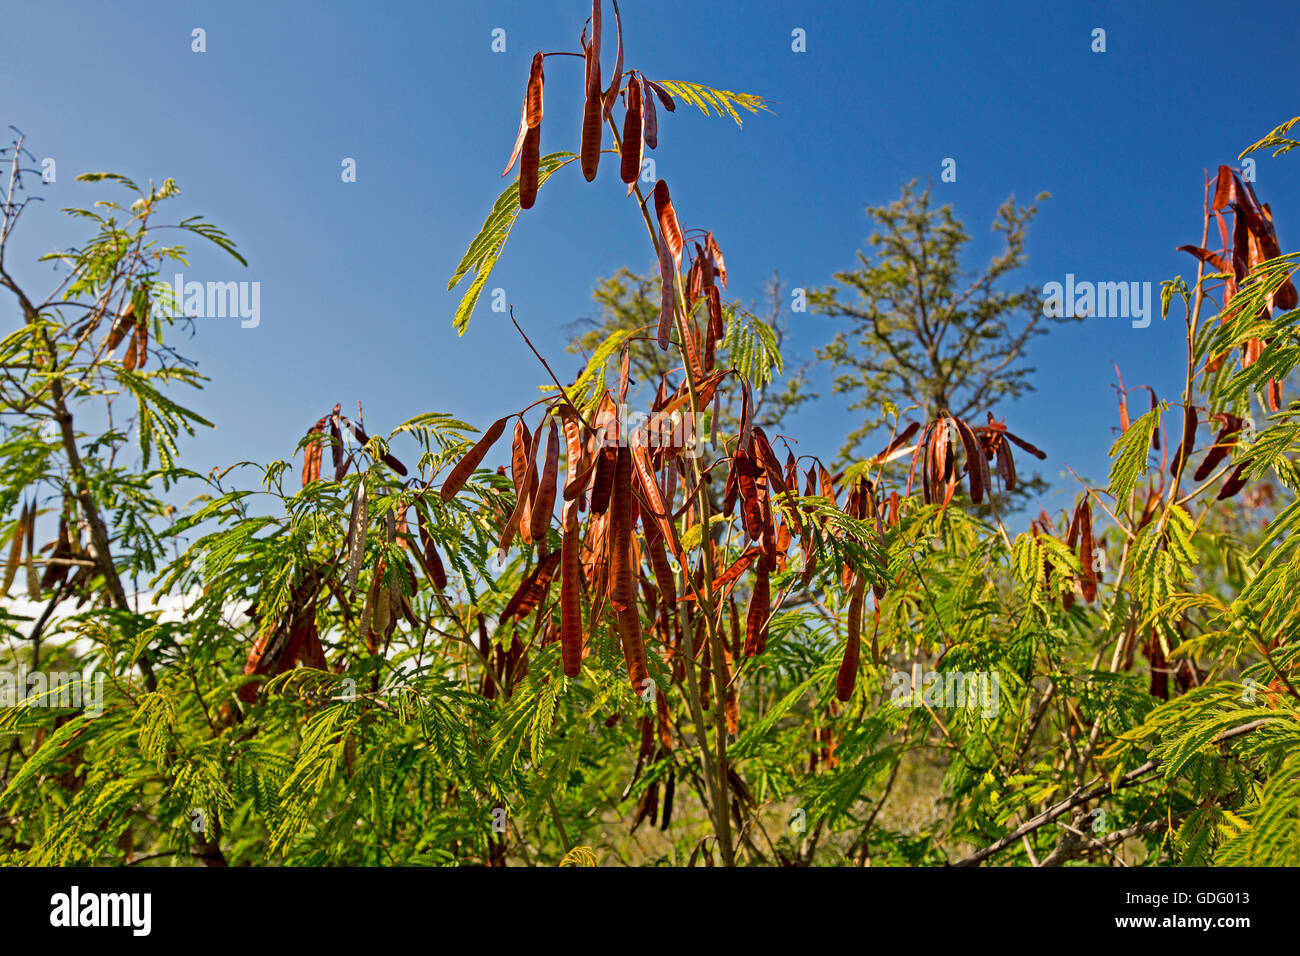 Mass of Leucaena leucocephala, fodder crop & environmental weed, with clusters of seed pods & green foliage against blue sky Stock Photo